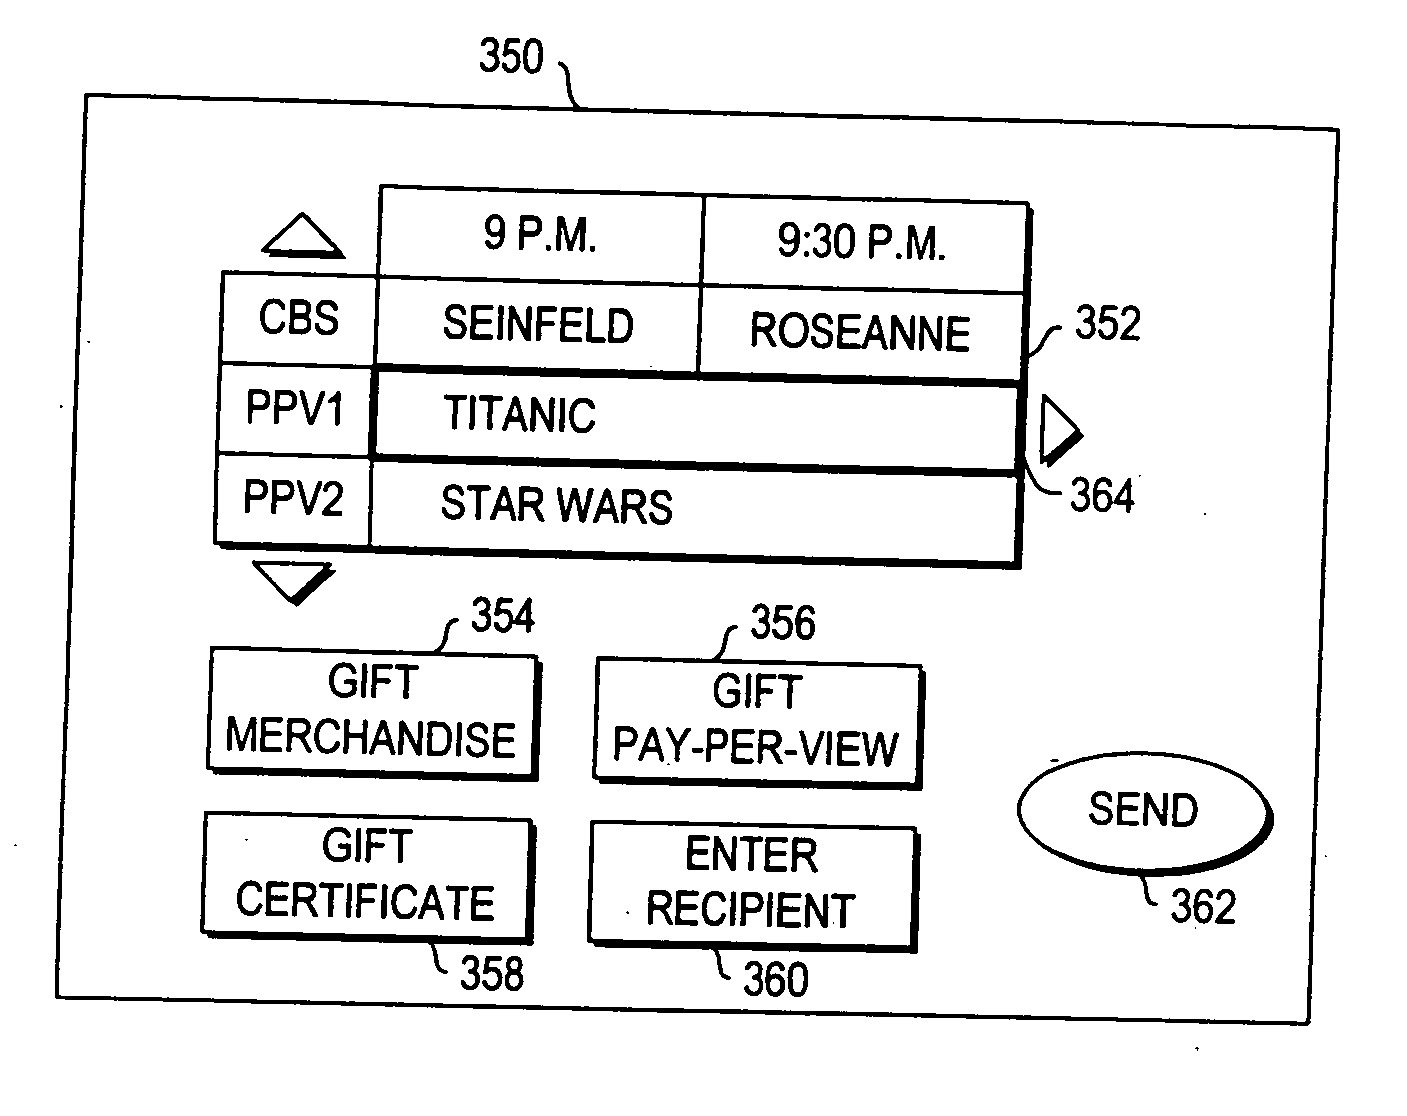 Systems and methods for providing a program as a gift using an interactive application